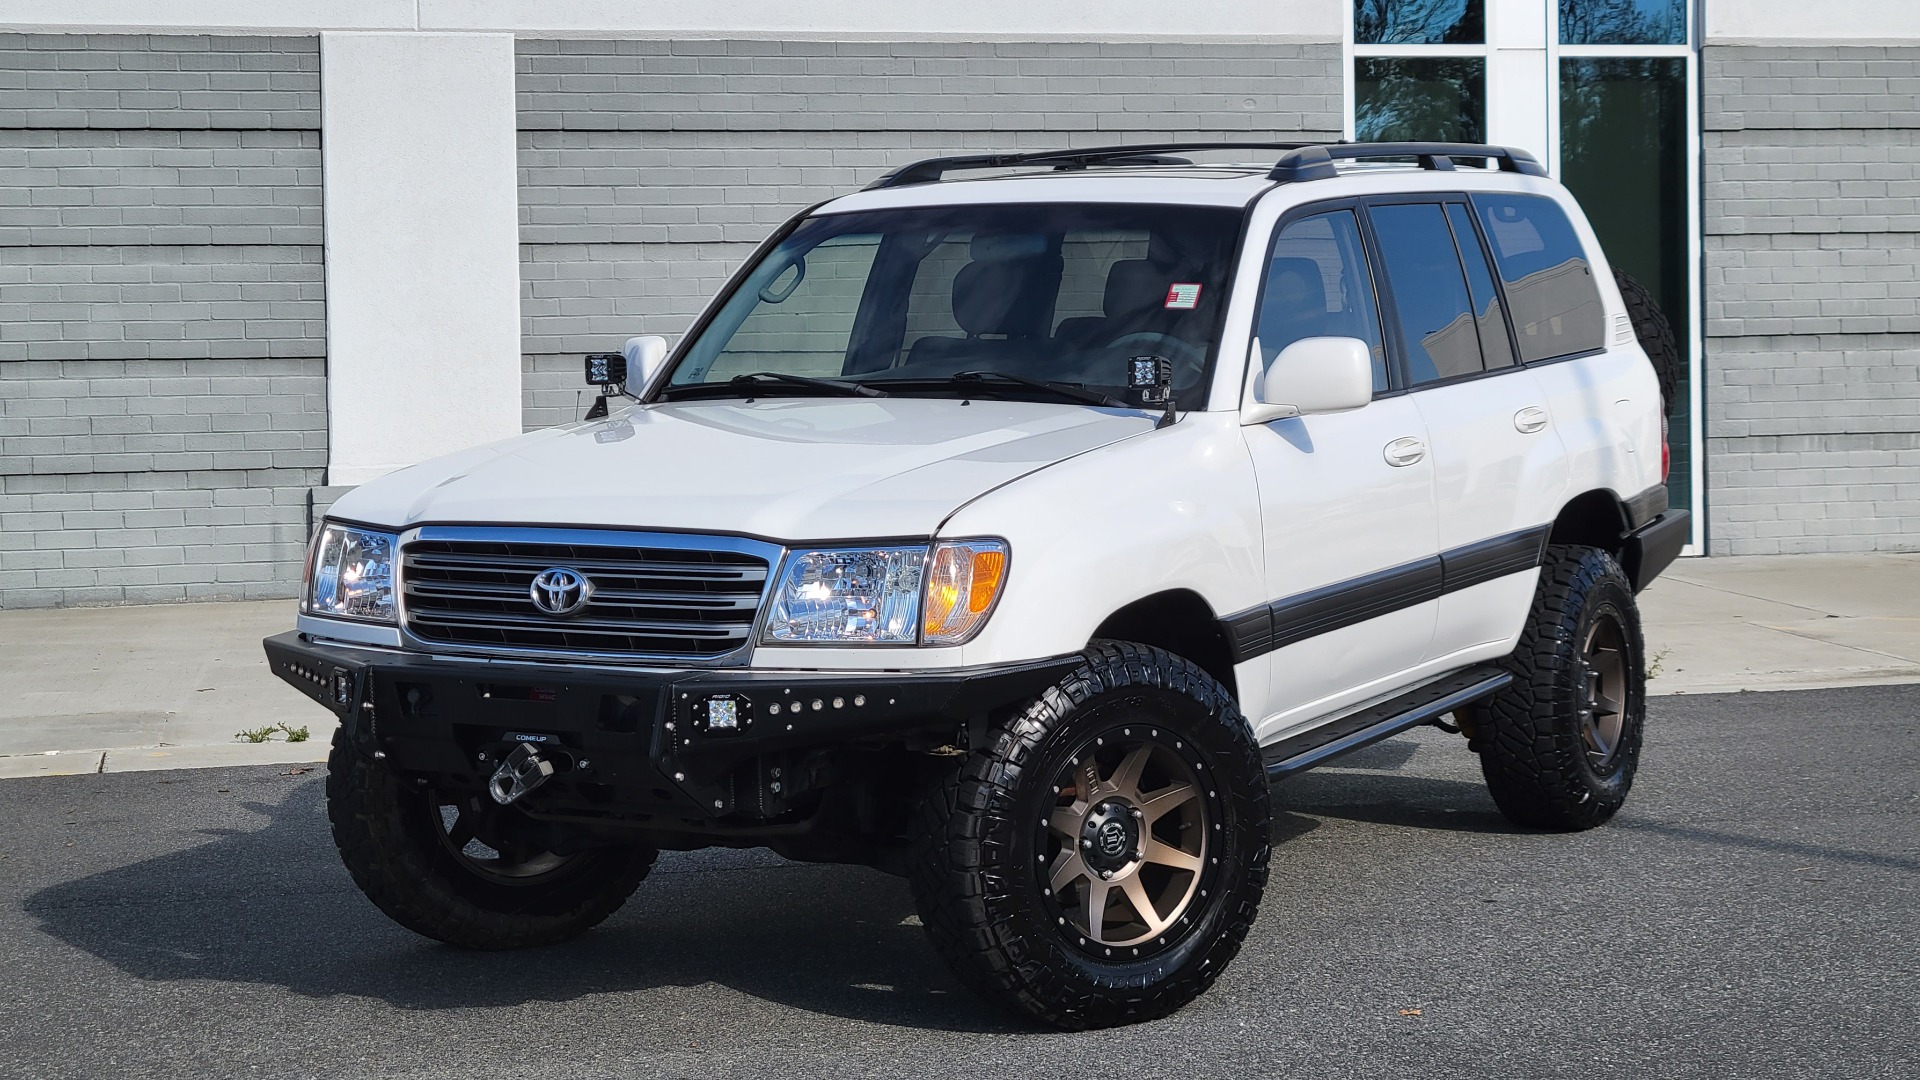 Used 2003 Toyota LAND CRUISER 4WD WAGON / 4.7L V8 / AUTO / NAVIGATION / LIFT / CUSTOM WHEELS for sale $27,999 at Formula Imports in Charlotte NC 28227 7